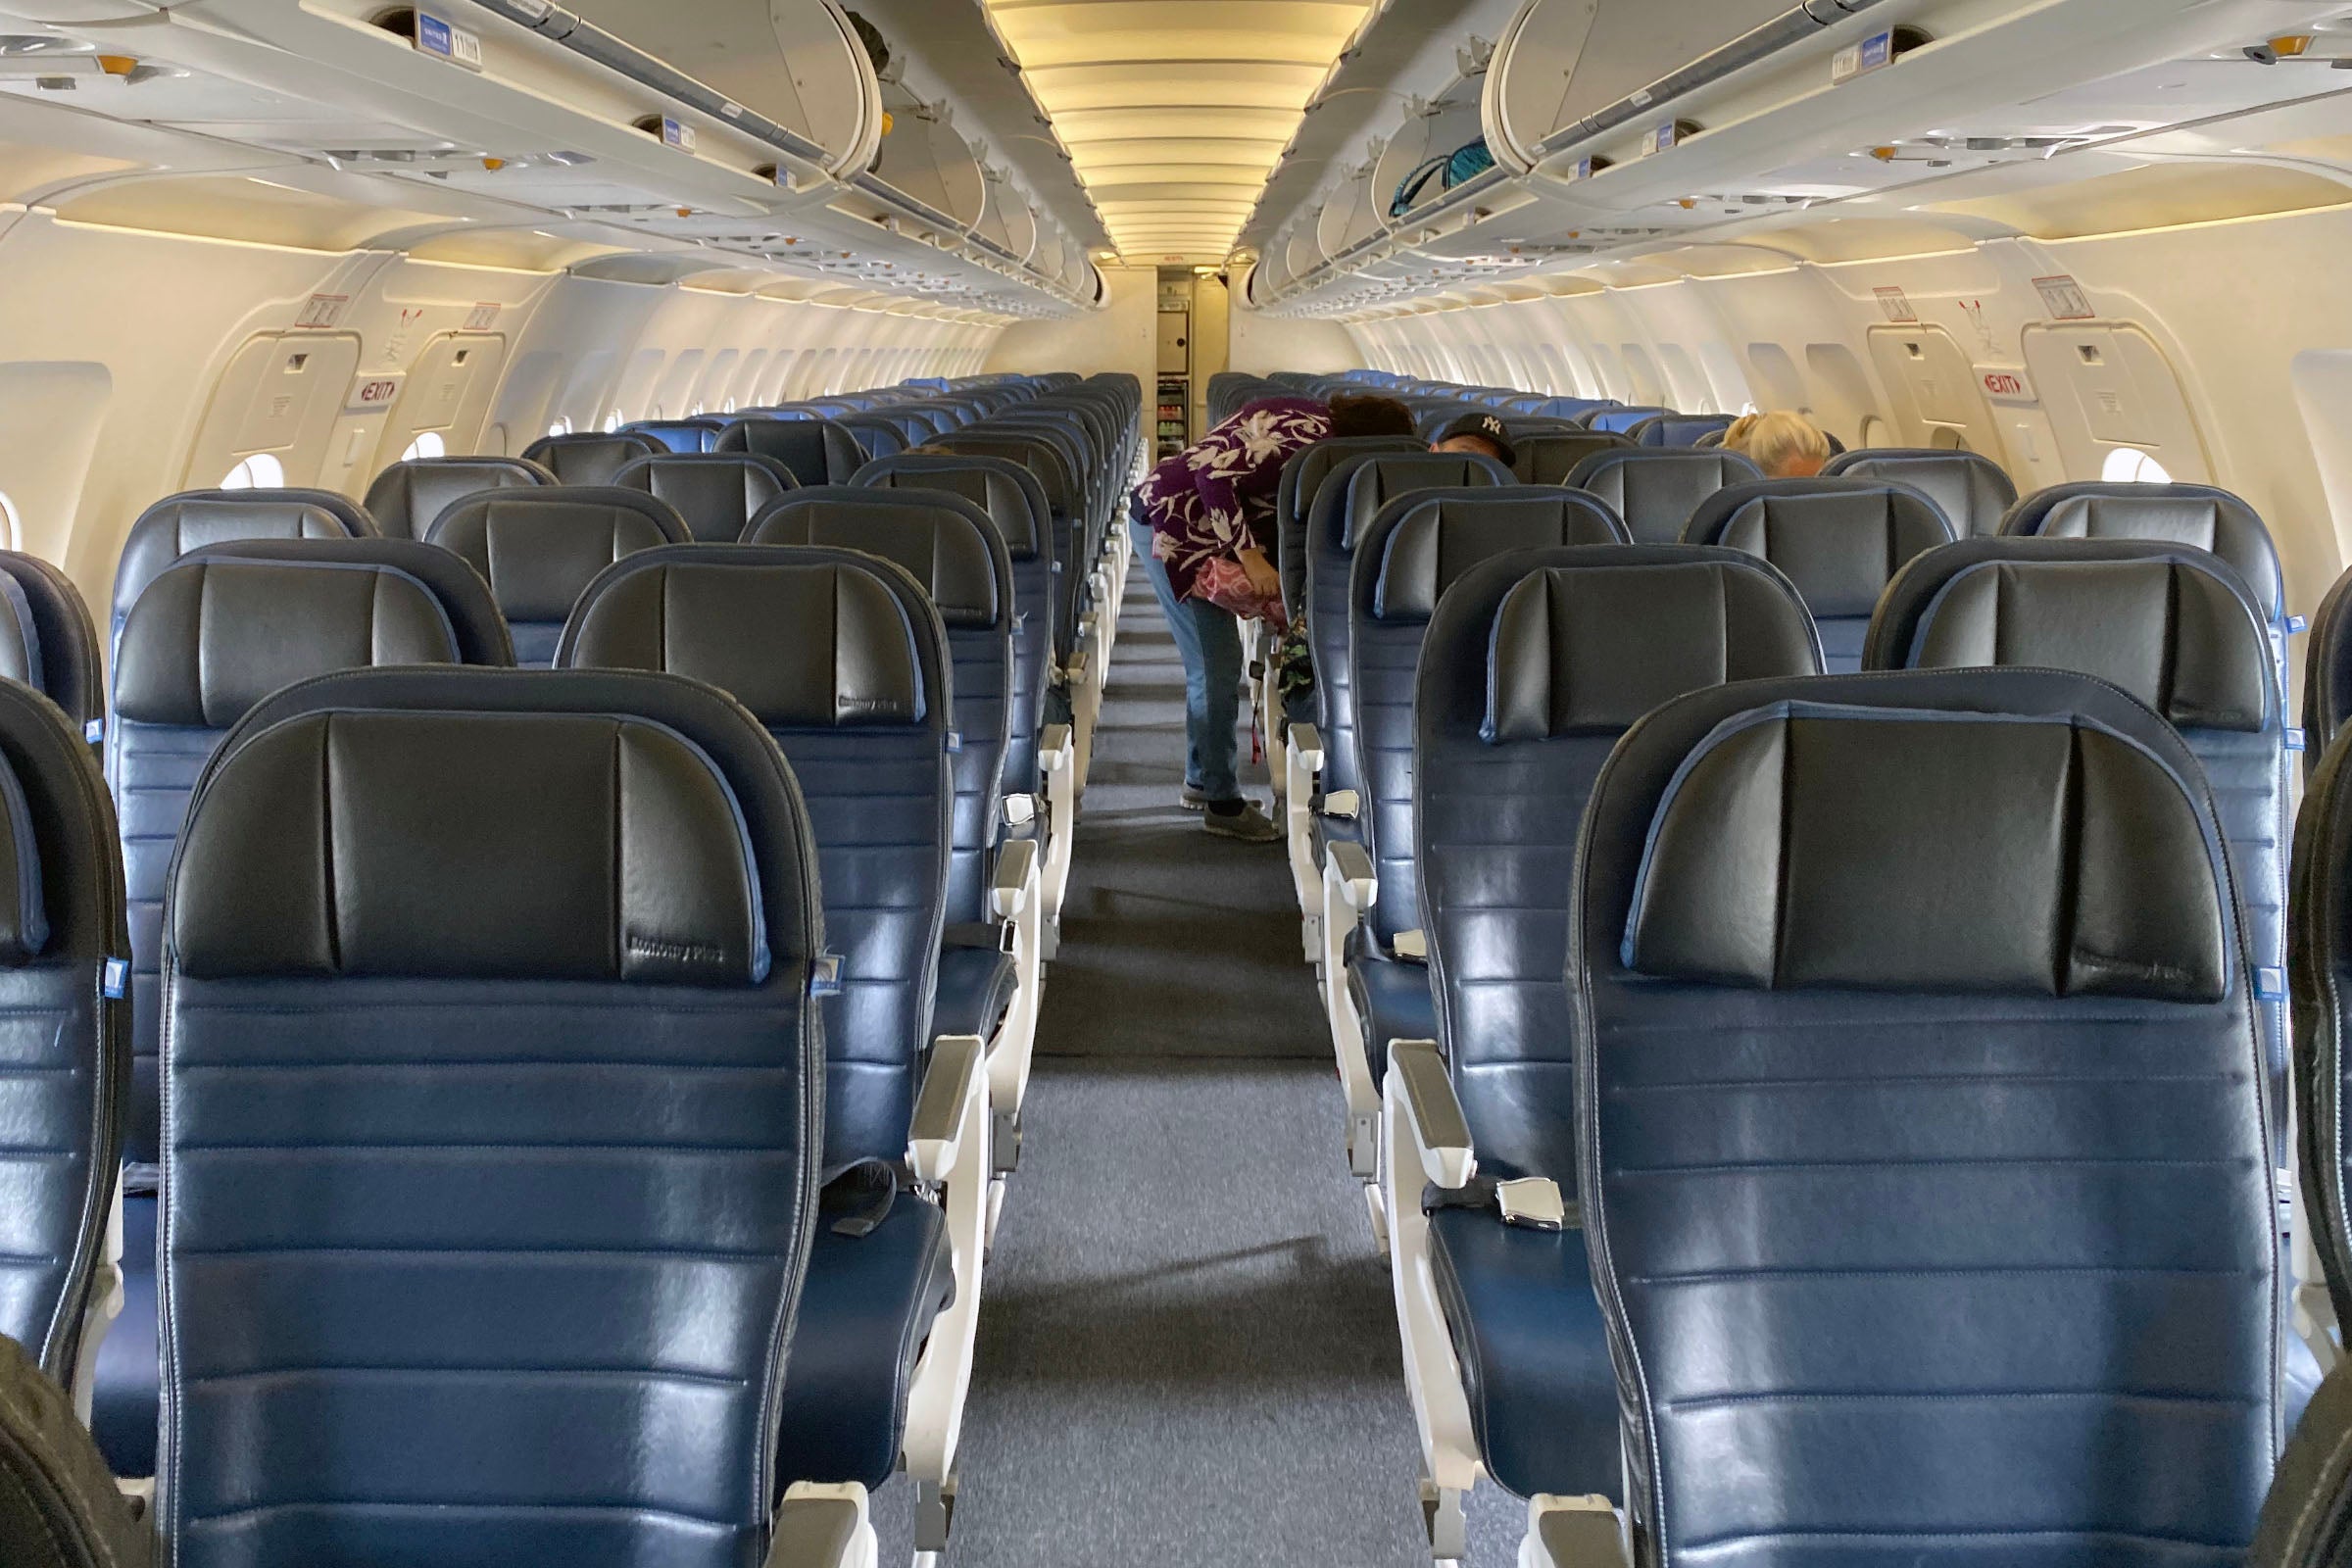 United A320 economy seating